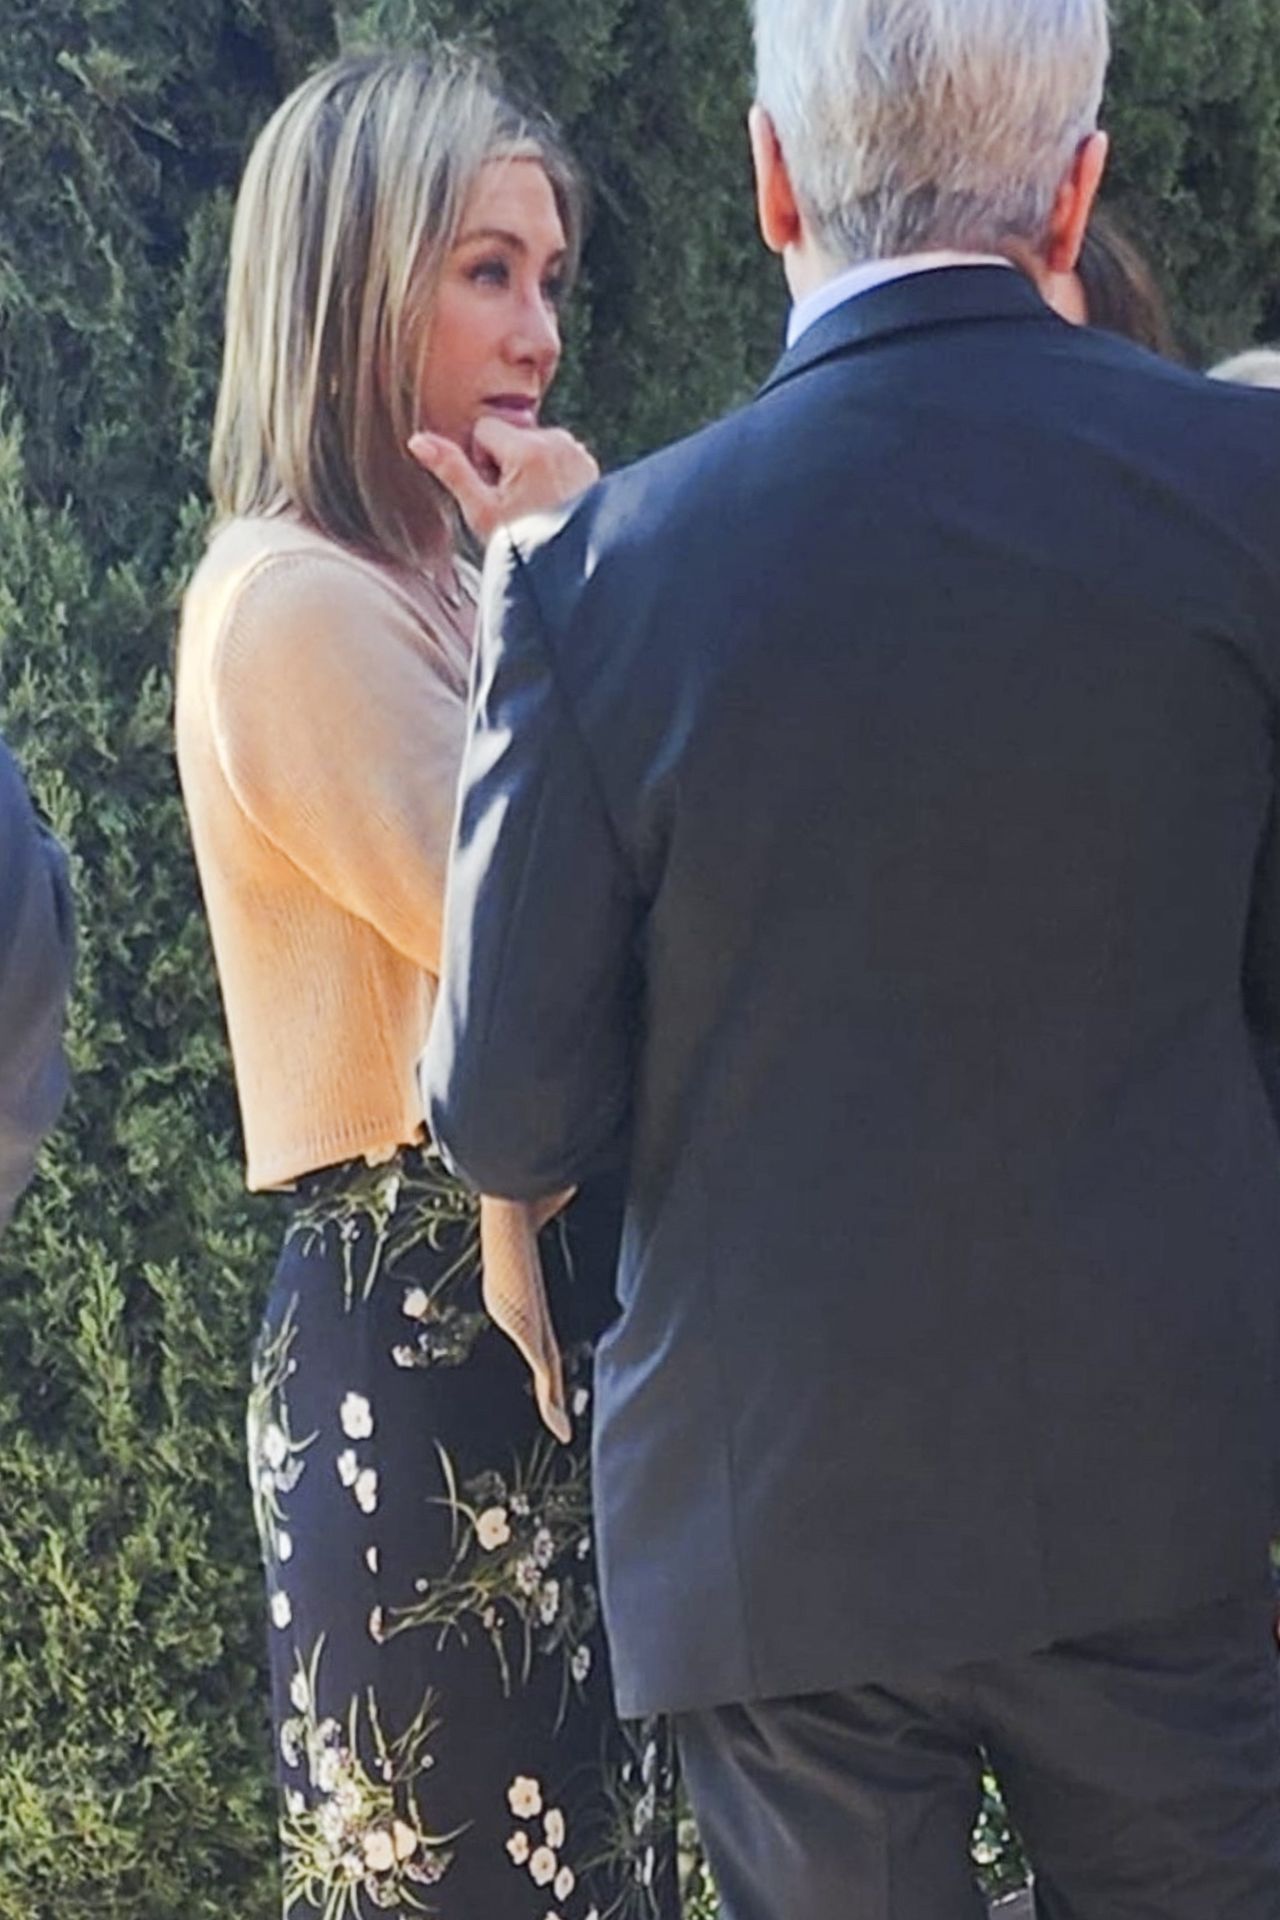 Jennifer Aniston in a low-cut dress rushes to the funeral.